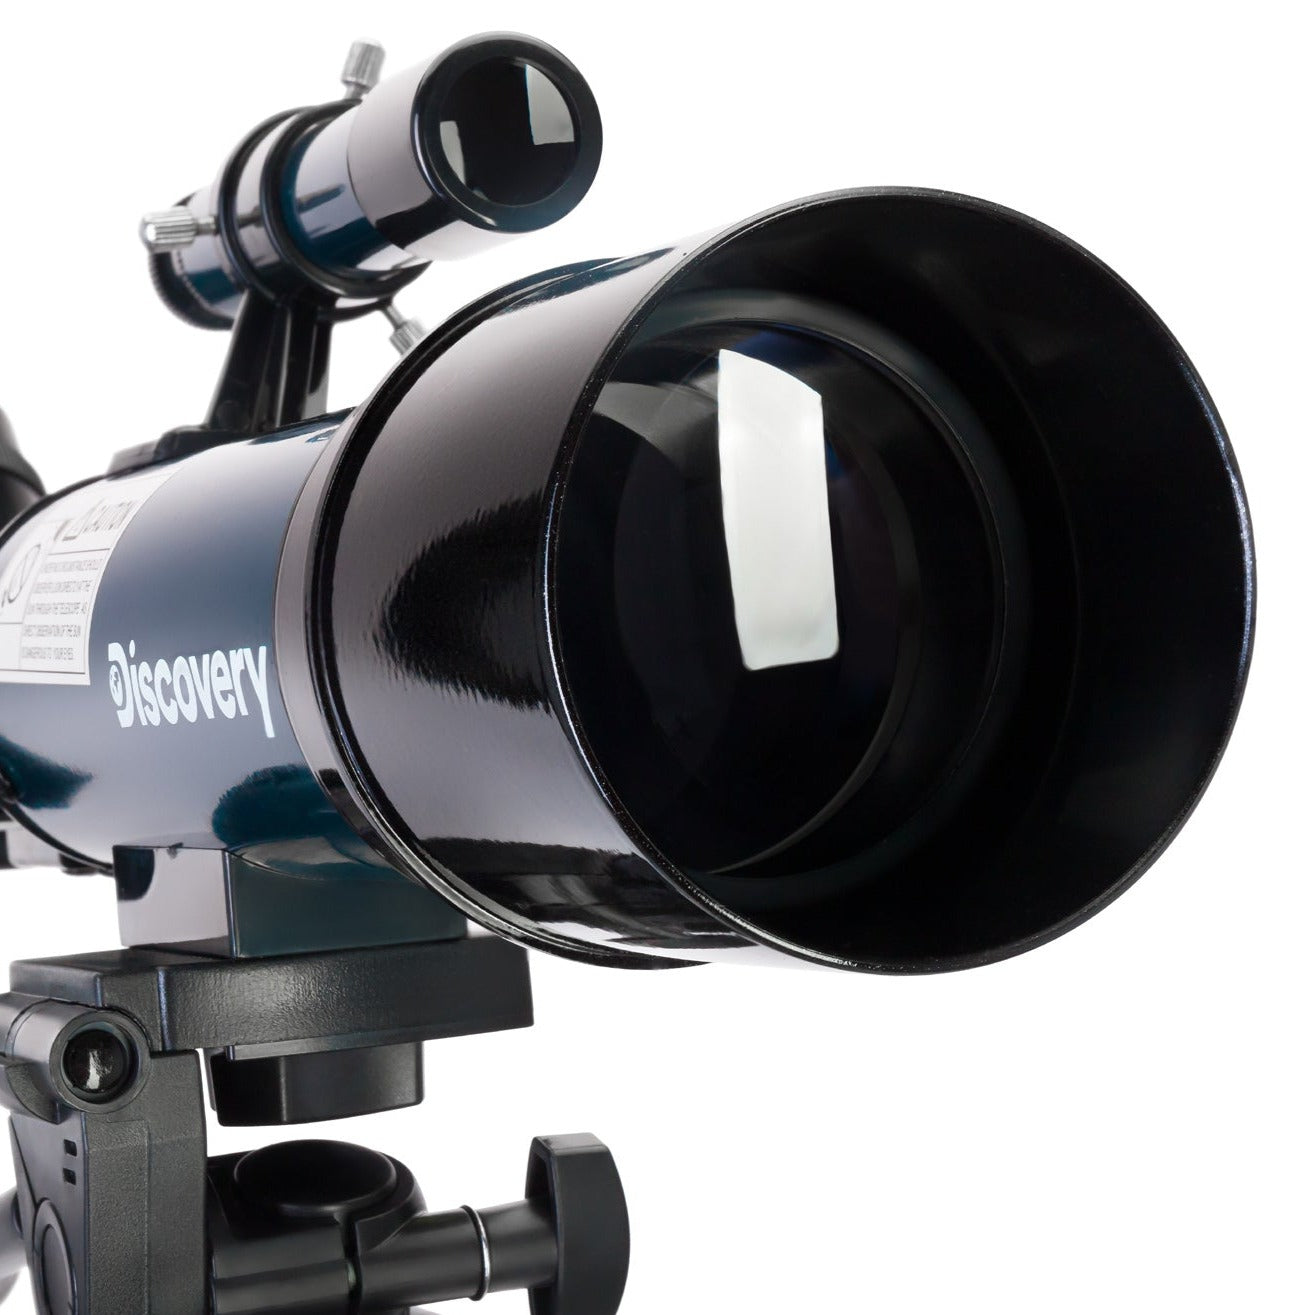 Discovery Sky Trip ST50 Telescope with Book